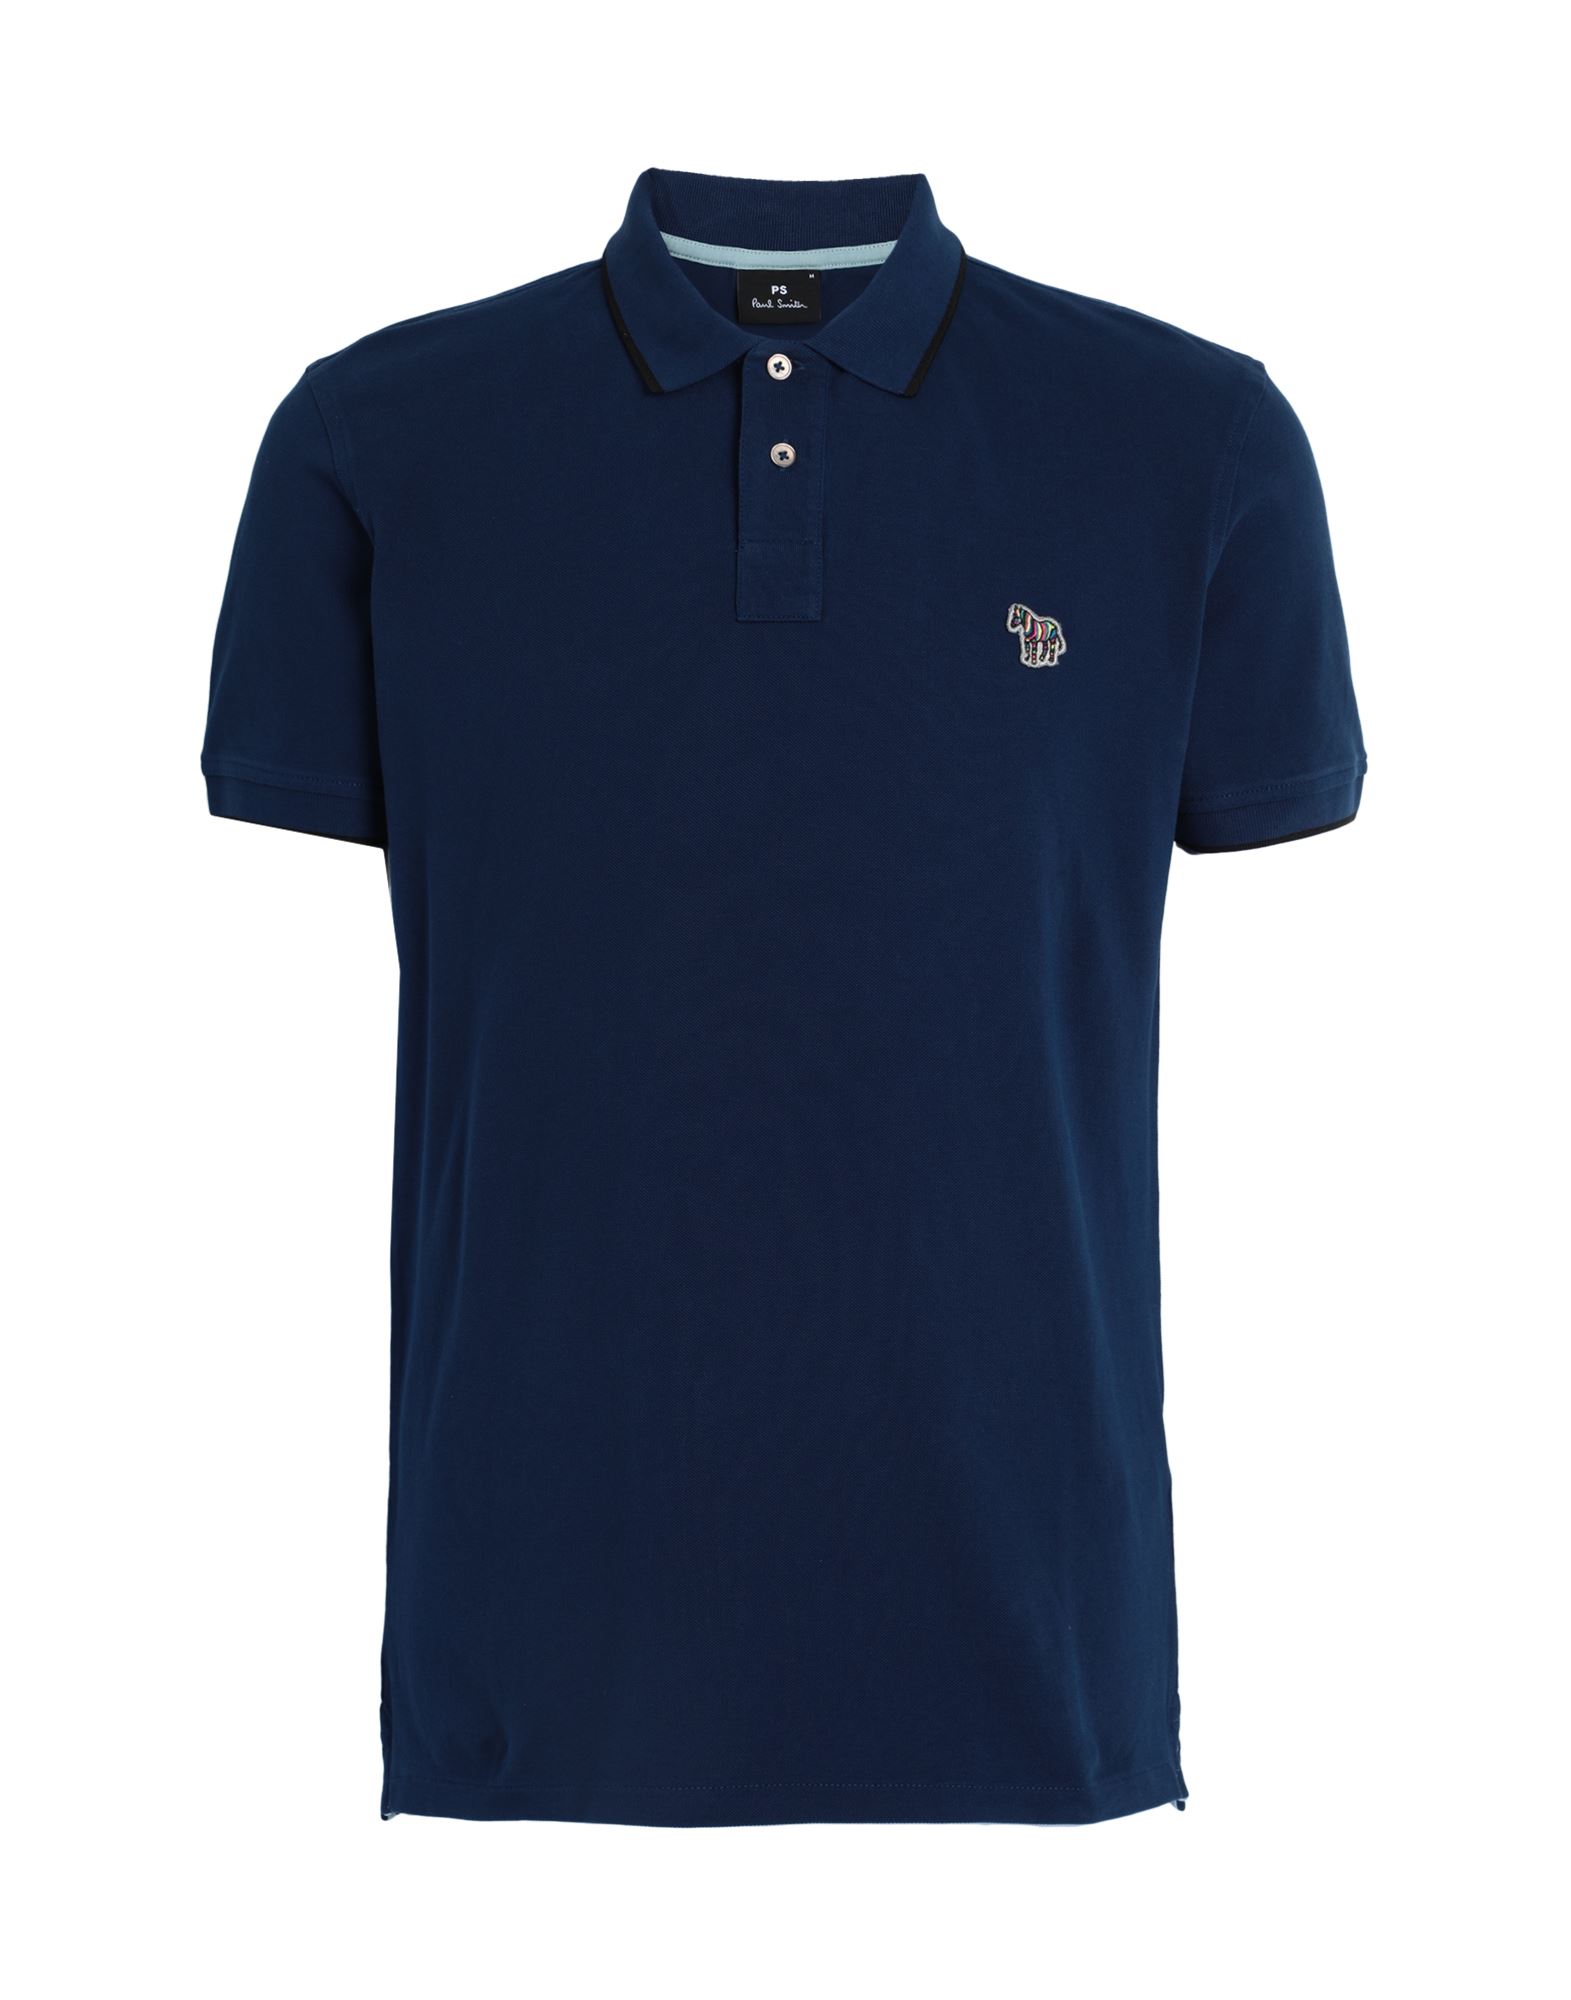 Ps By Paul Smith Ps Paul Smith Man Polo Shirt Navy Blue Size Xl Organic Cotton